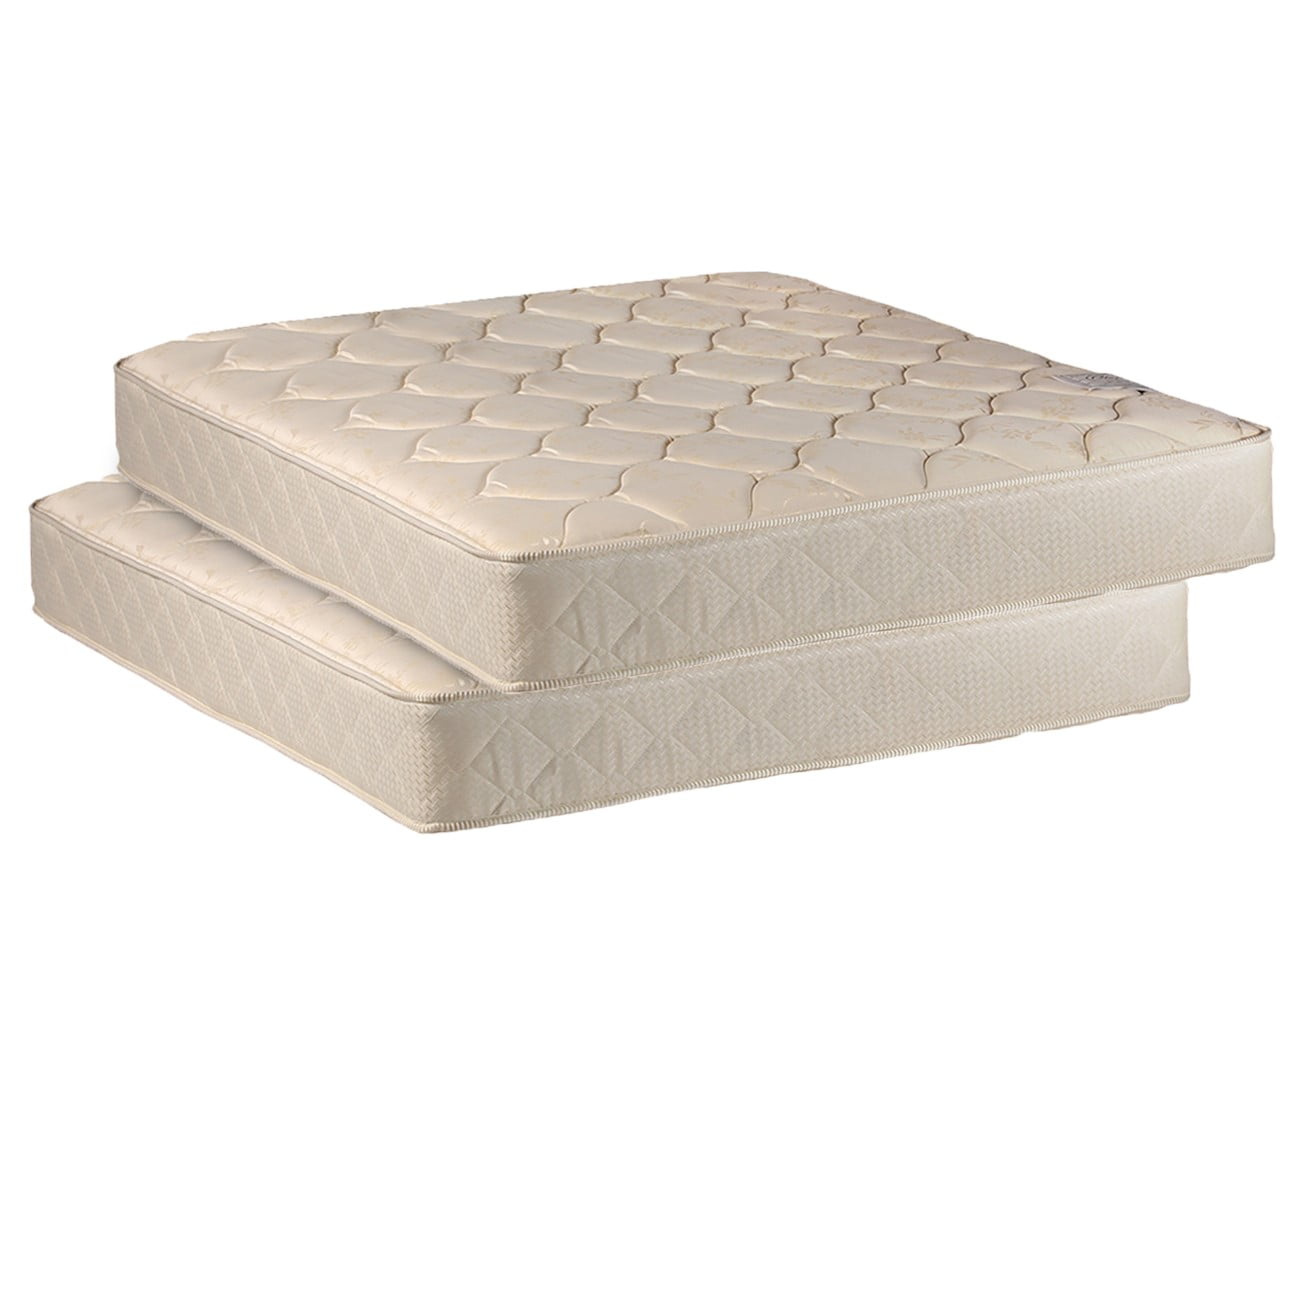 Two Twin Mattresses Package For Bunk, What Size Mattress For A Twin Bunk Bed